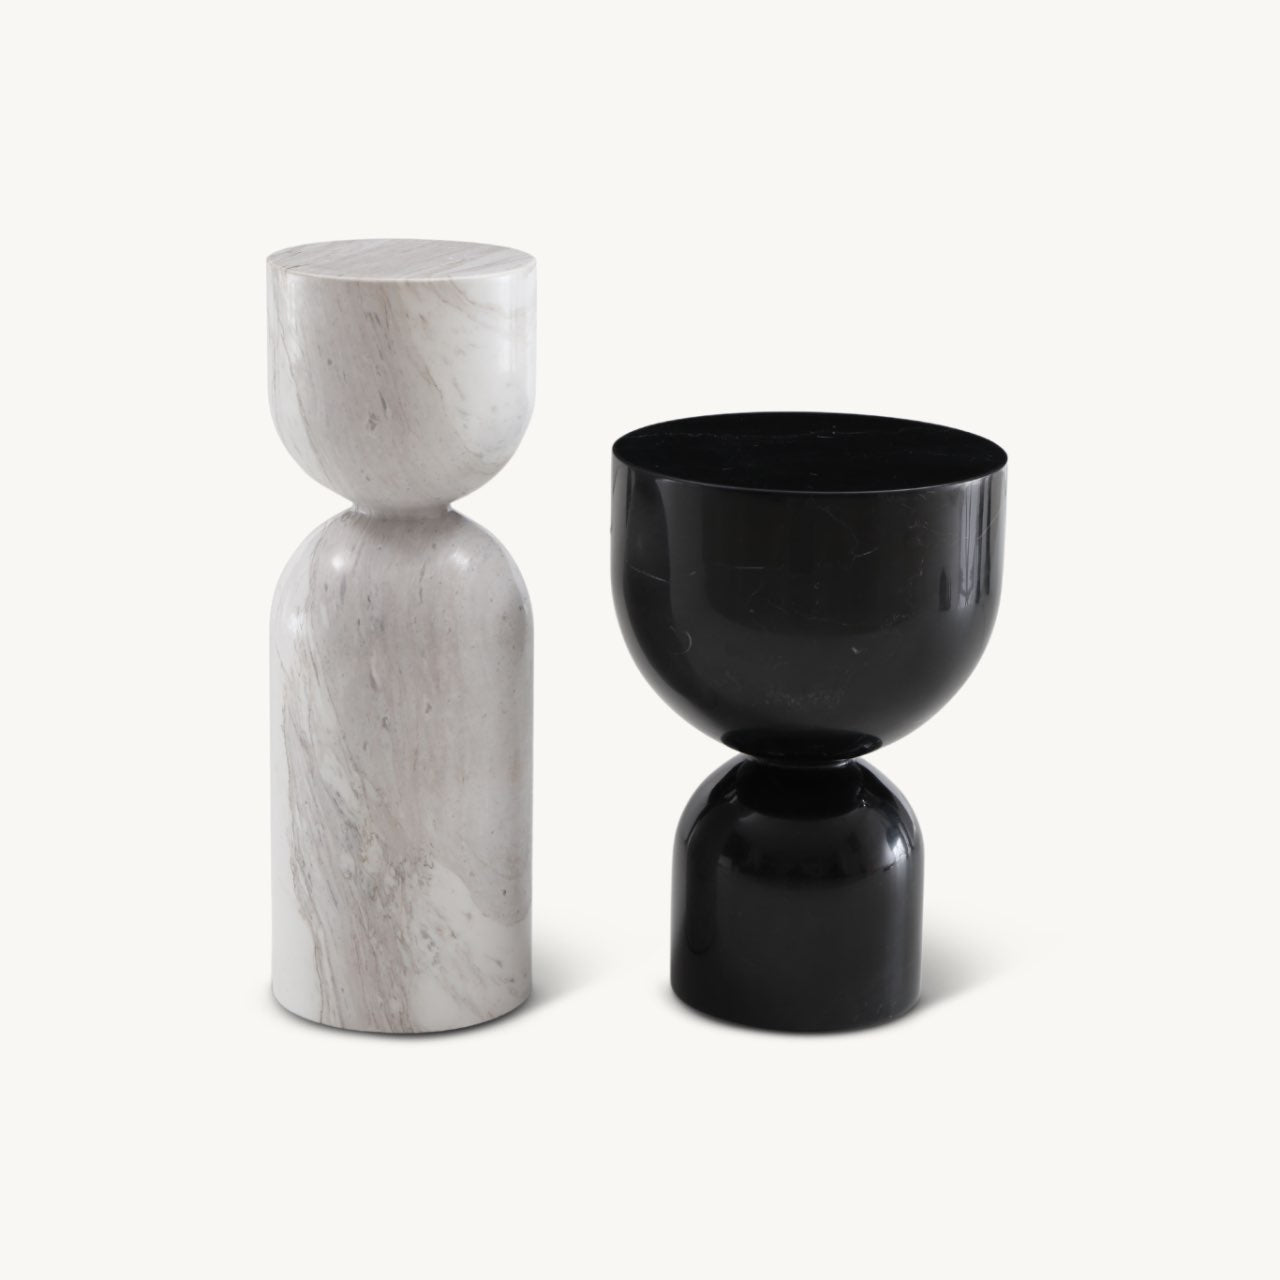 salt white marble side table shown next to Pepper black marble side table